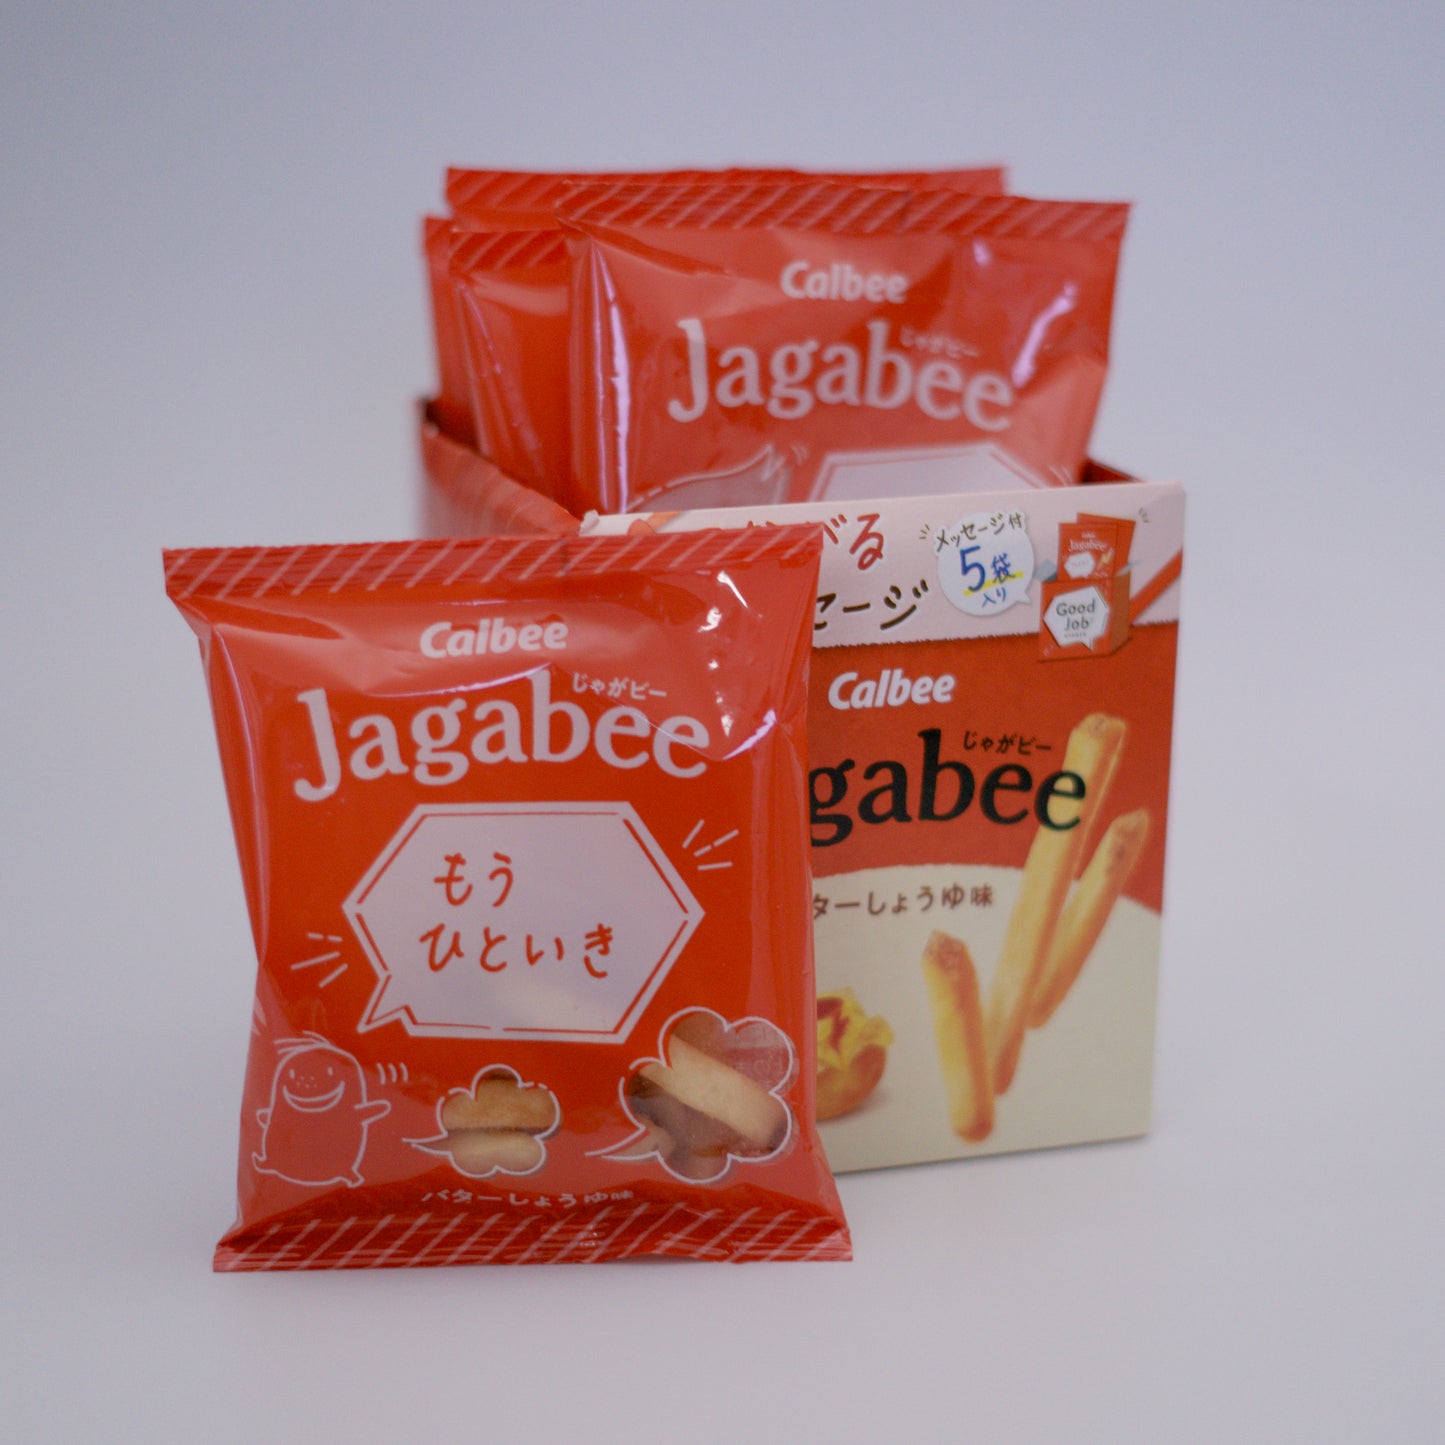 Calbee Jagabee Butter Soy Sauce Flavour 5 Pack Box (5x16g)